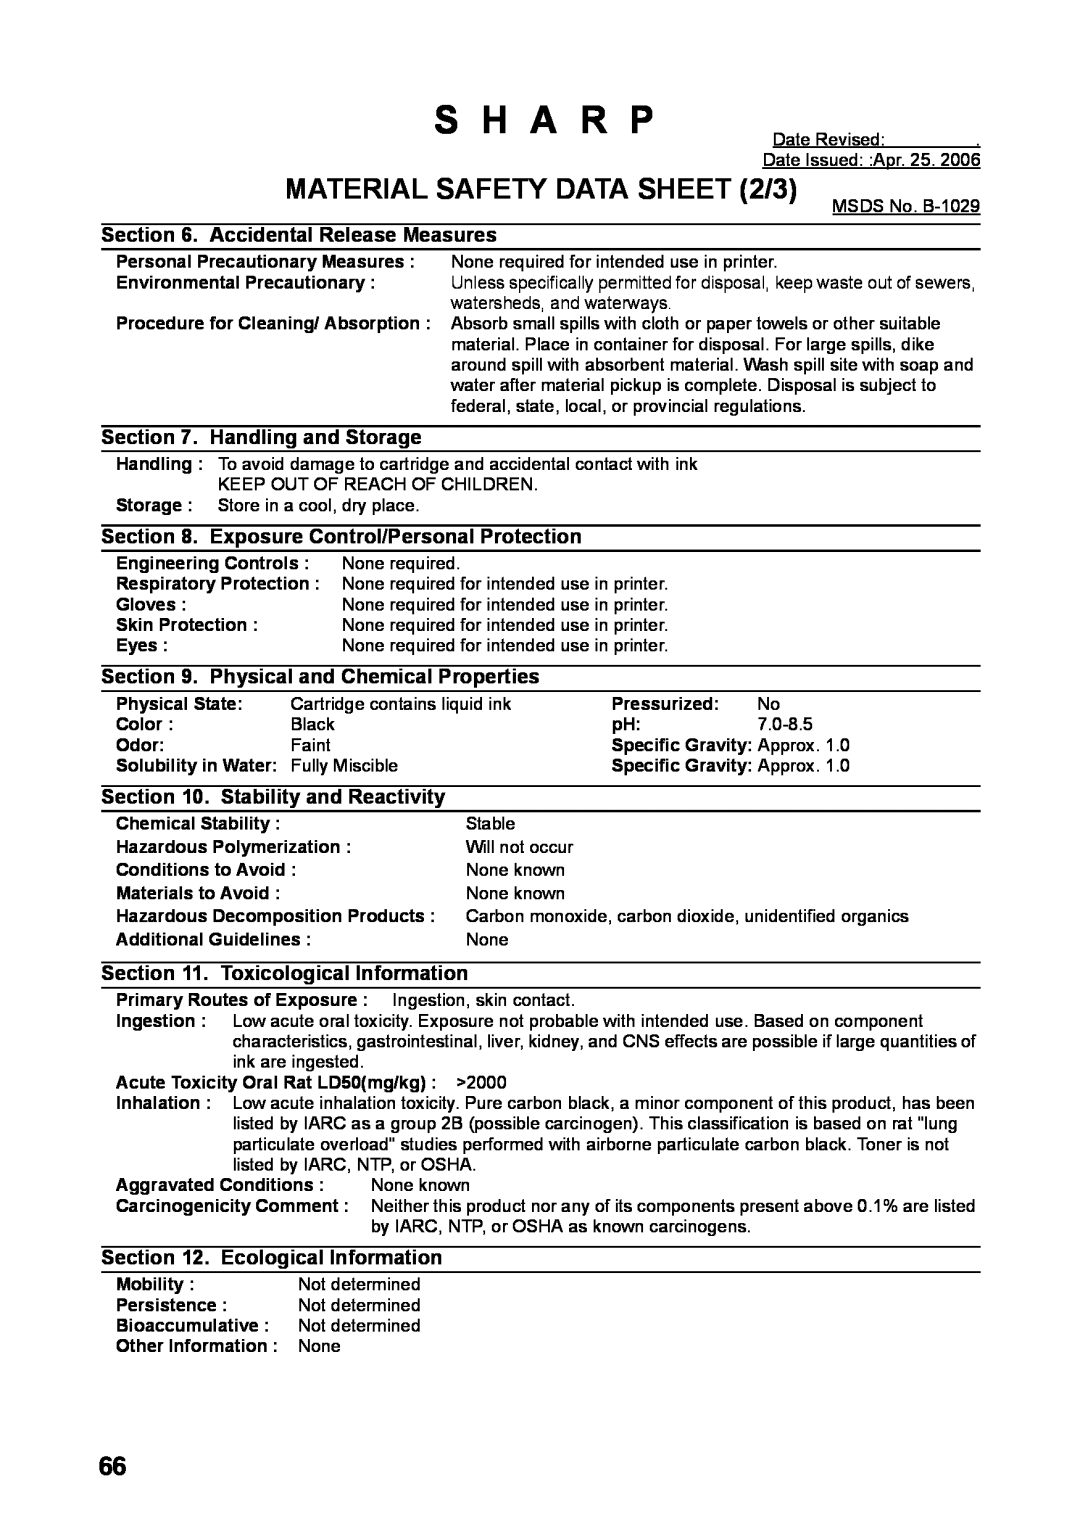 Sharp UX-B800SE MATERIAL SAFETY DATA SHEET 2/3, S H A R P, Accidental Release Measures, Handling and Storage 